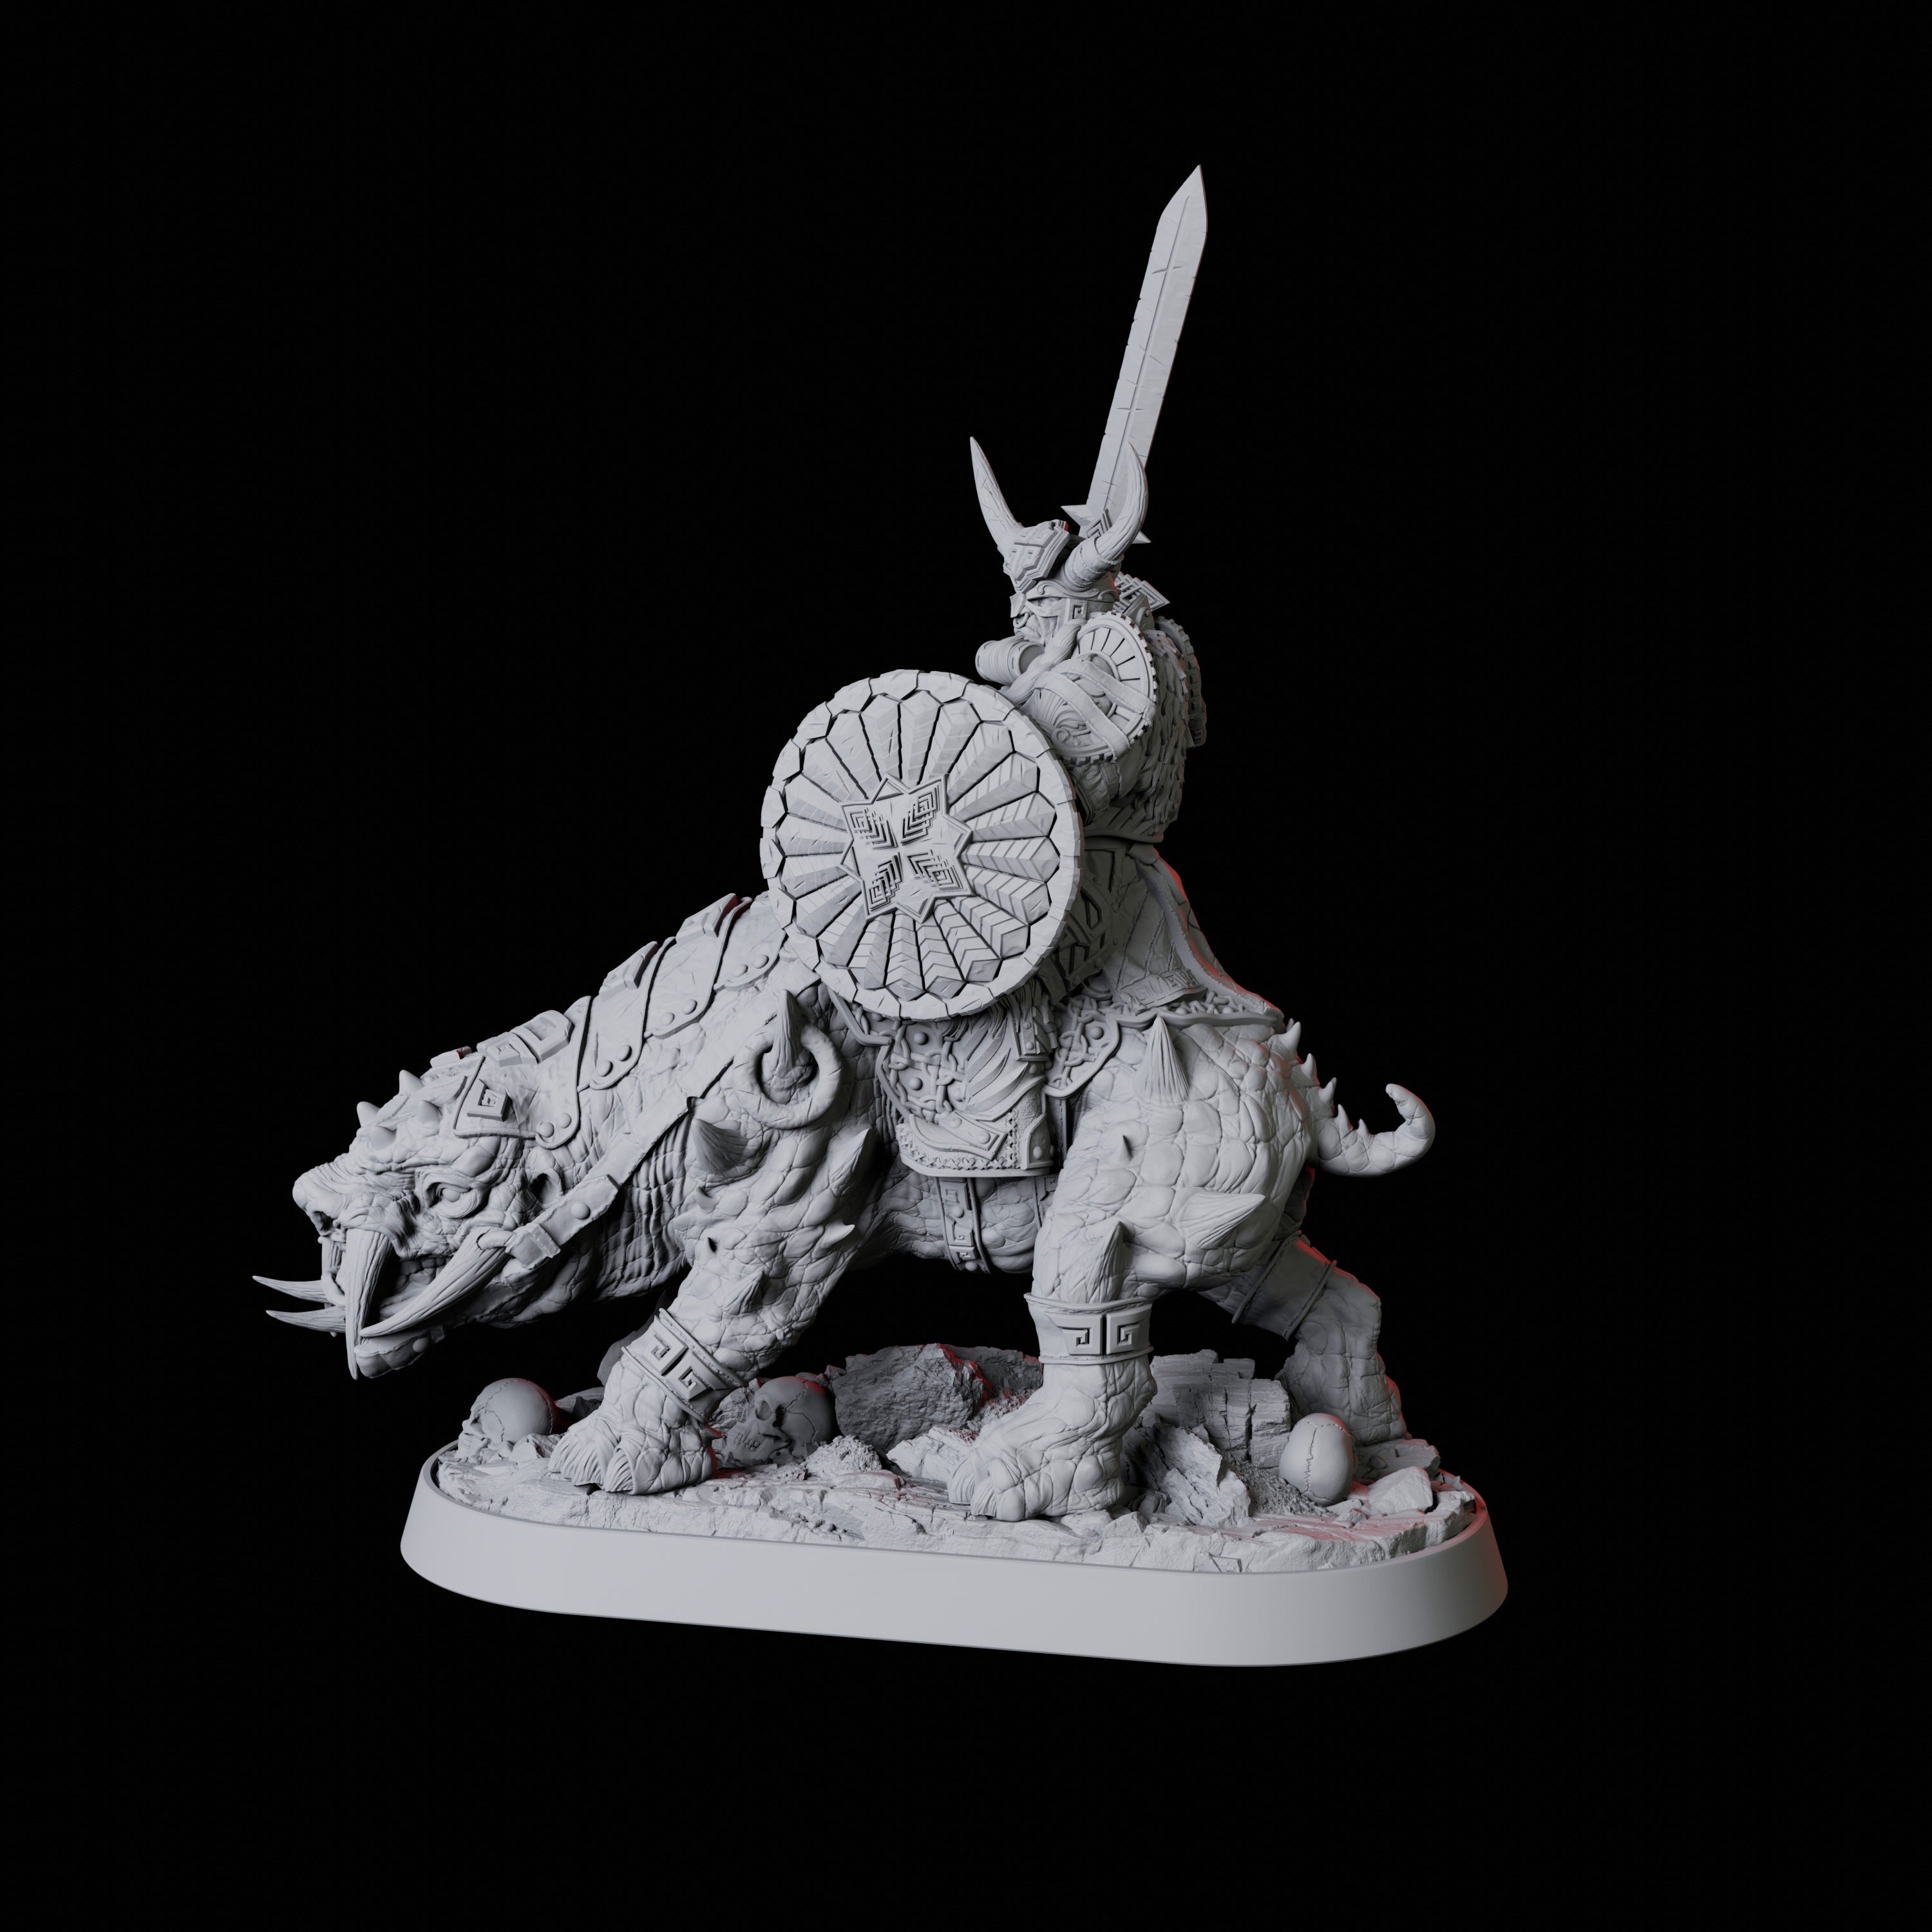 Mounted Barbarian Warrior Miniature for Dungeons and Dragons